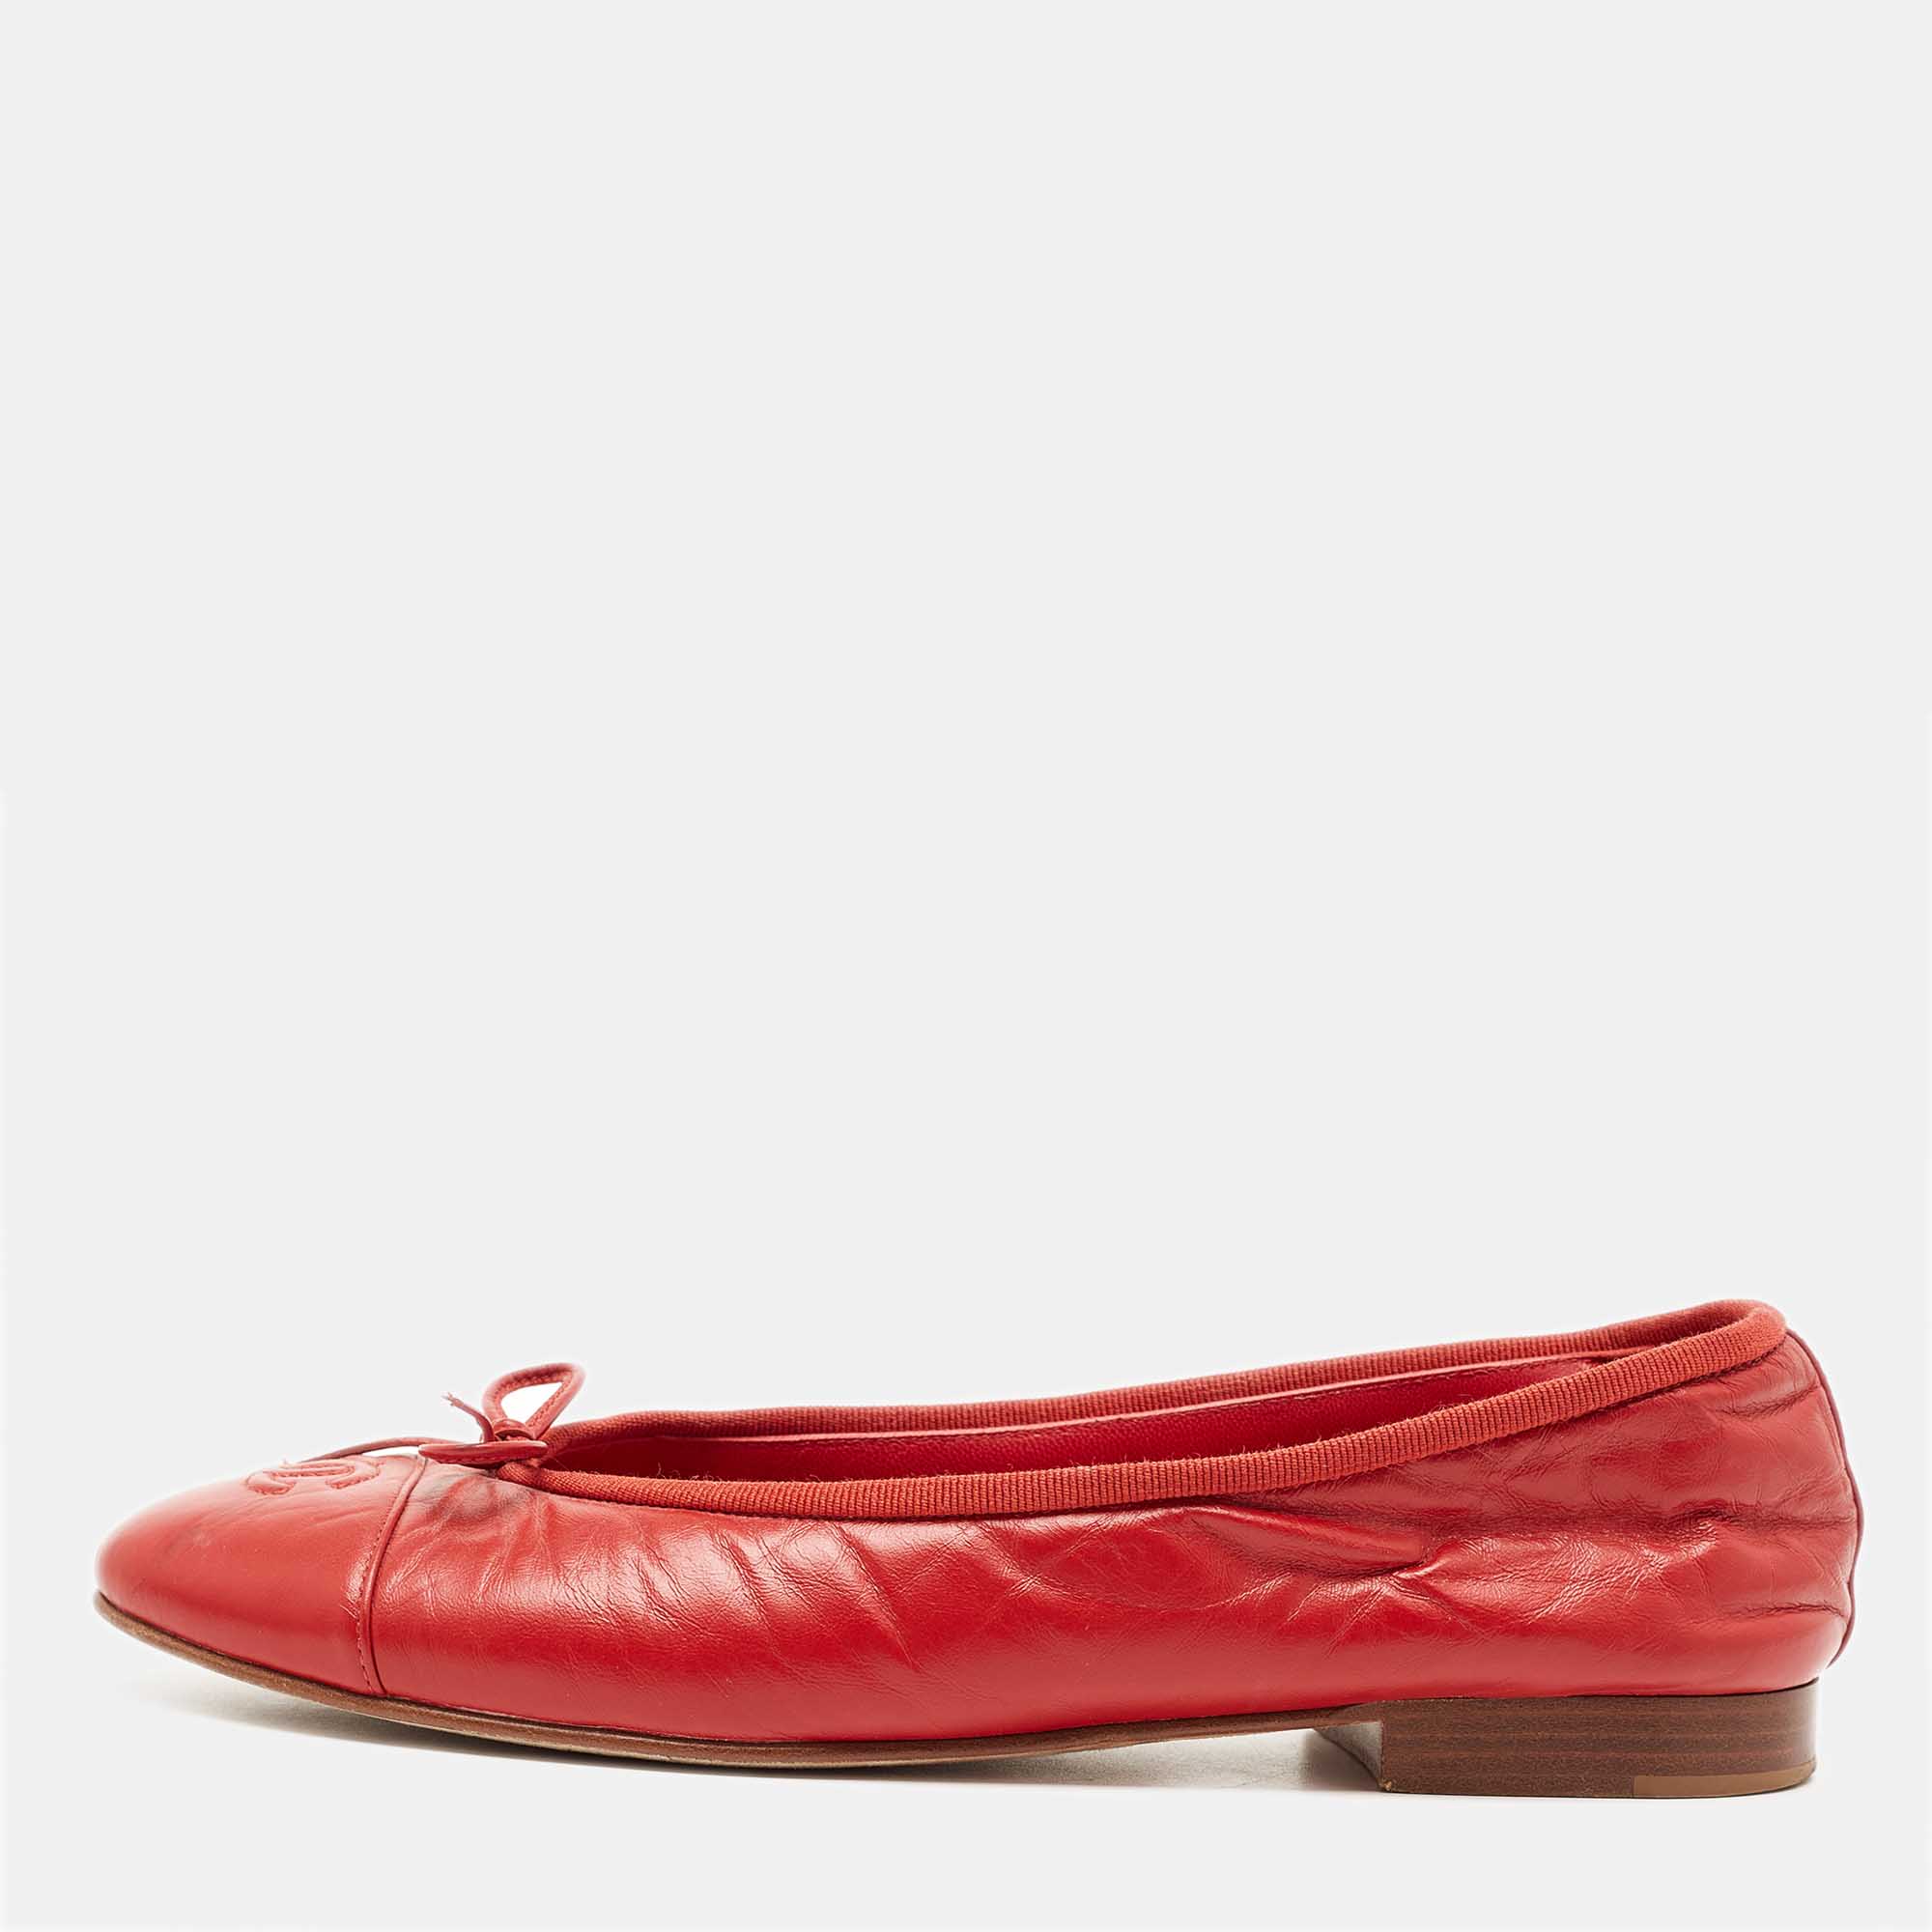 Chanel Red Leather CC Bow Ballet Flats Size 38.5